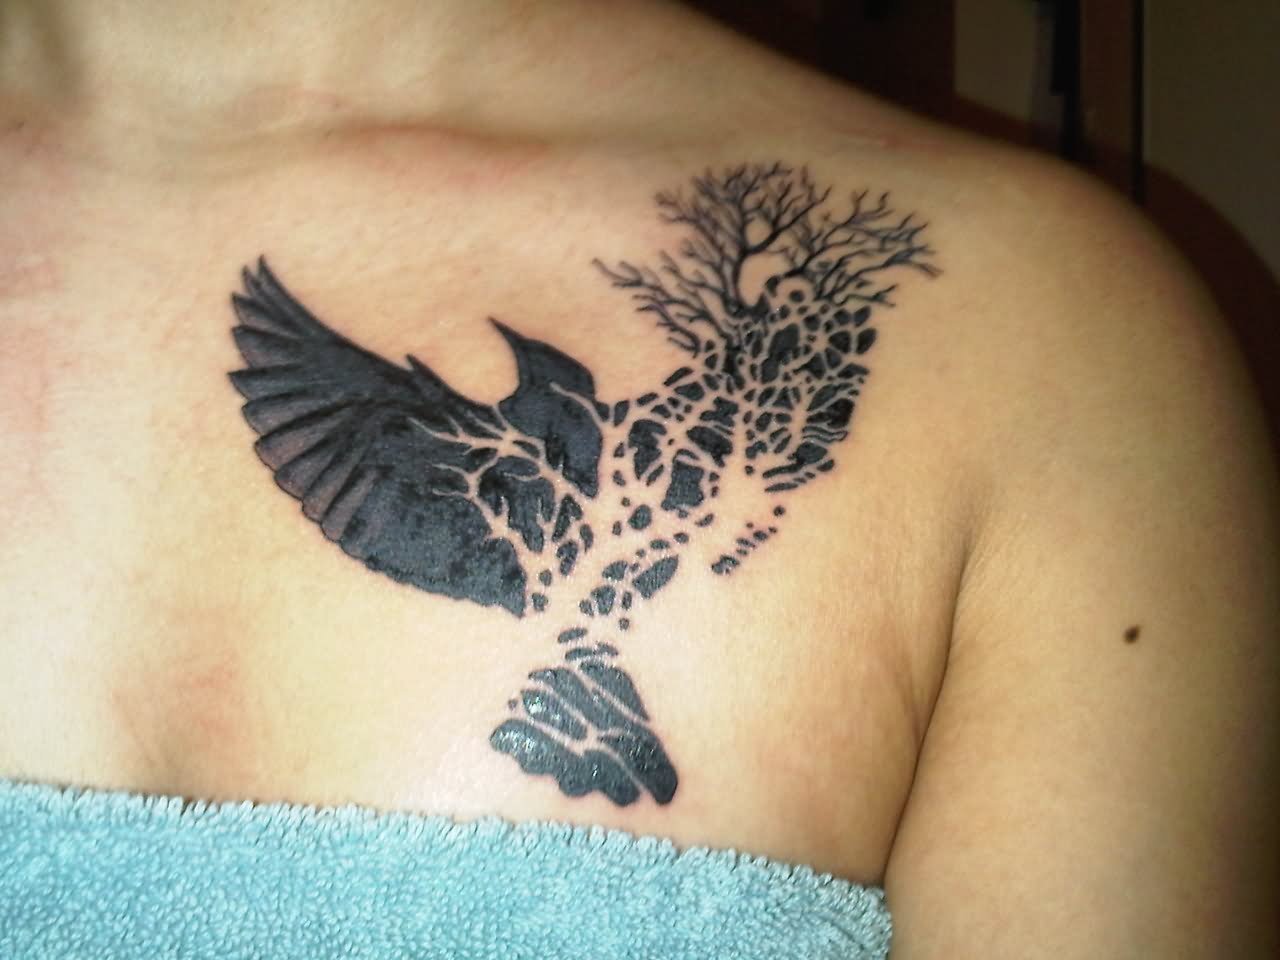 Black Bird Tattoo With Tree Tattoo On Front Shoulder